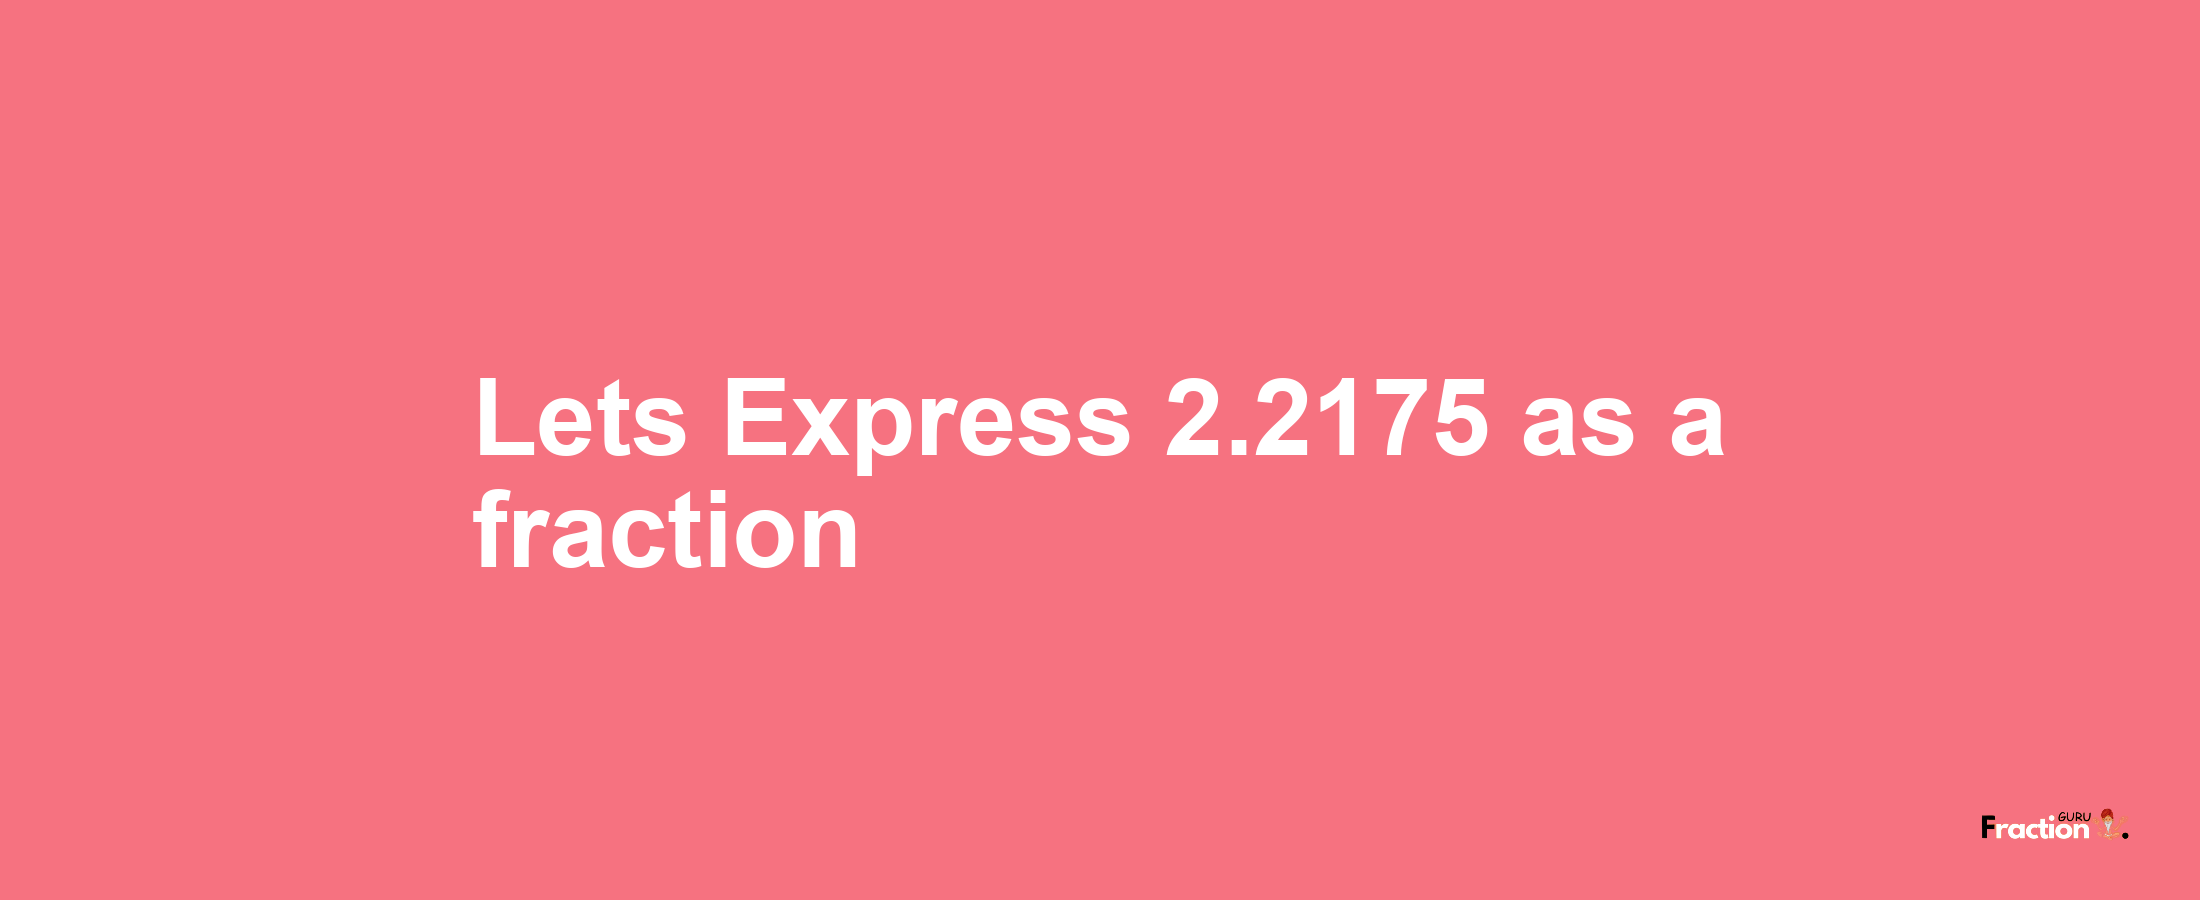 Lets Express 2.2175 as afraction